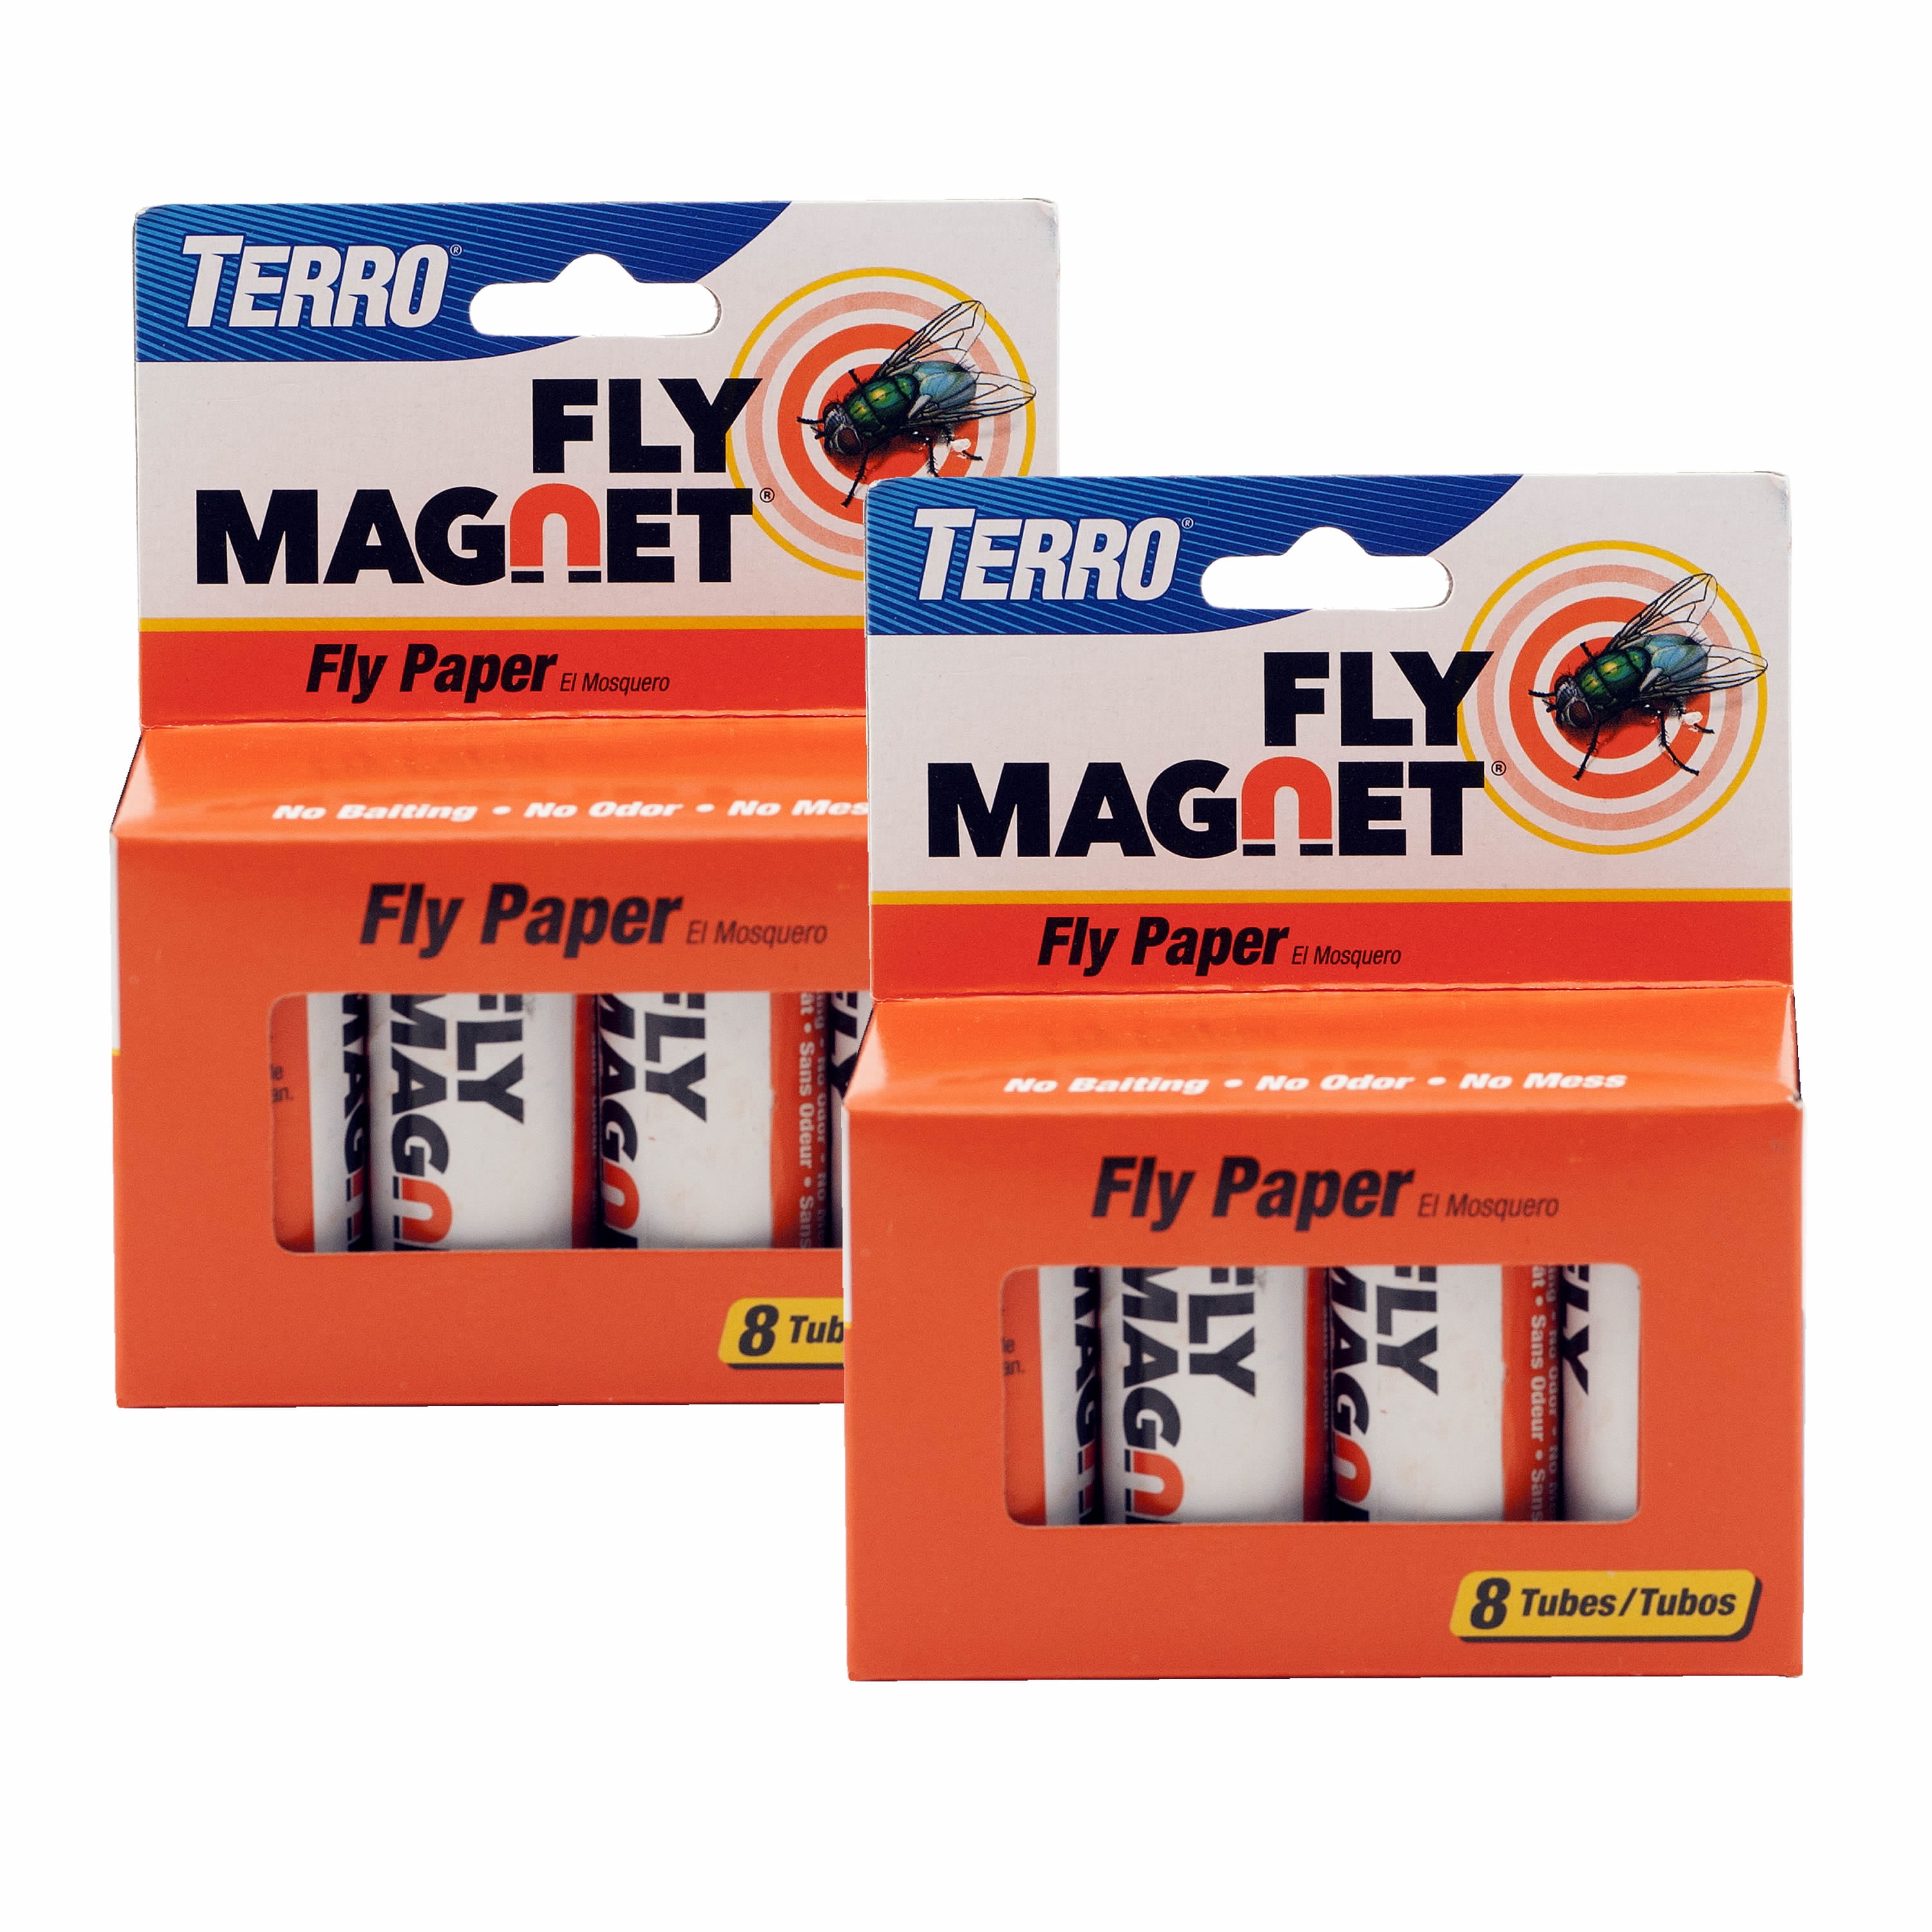 TERRO Fly Magnet Sticky Fly Paper Trap